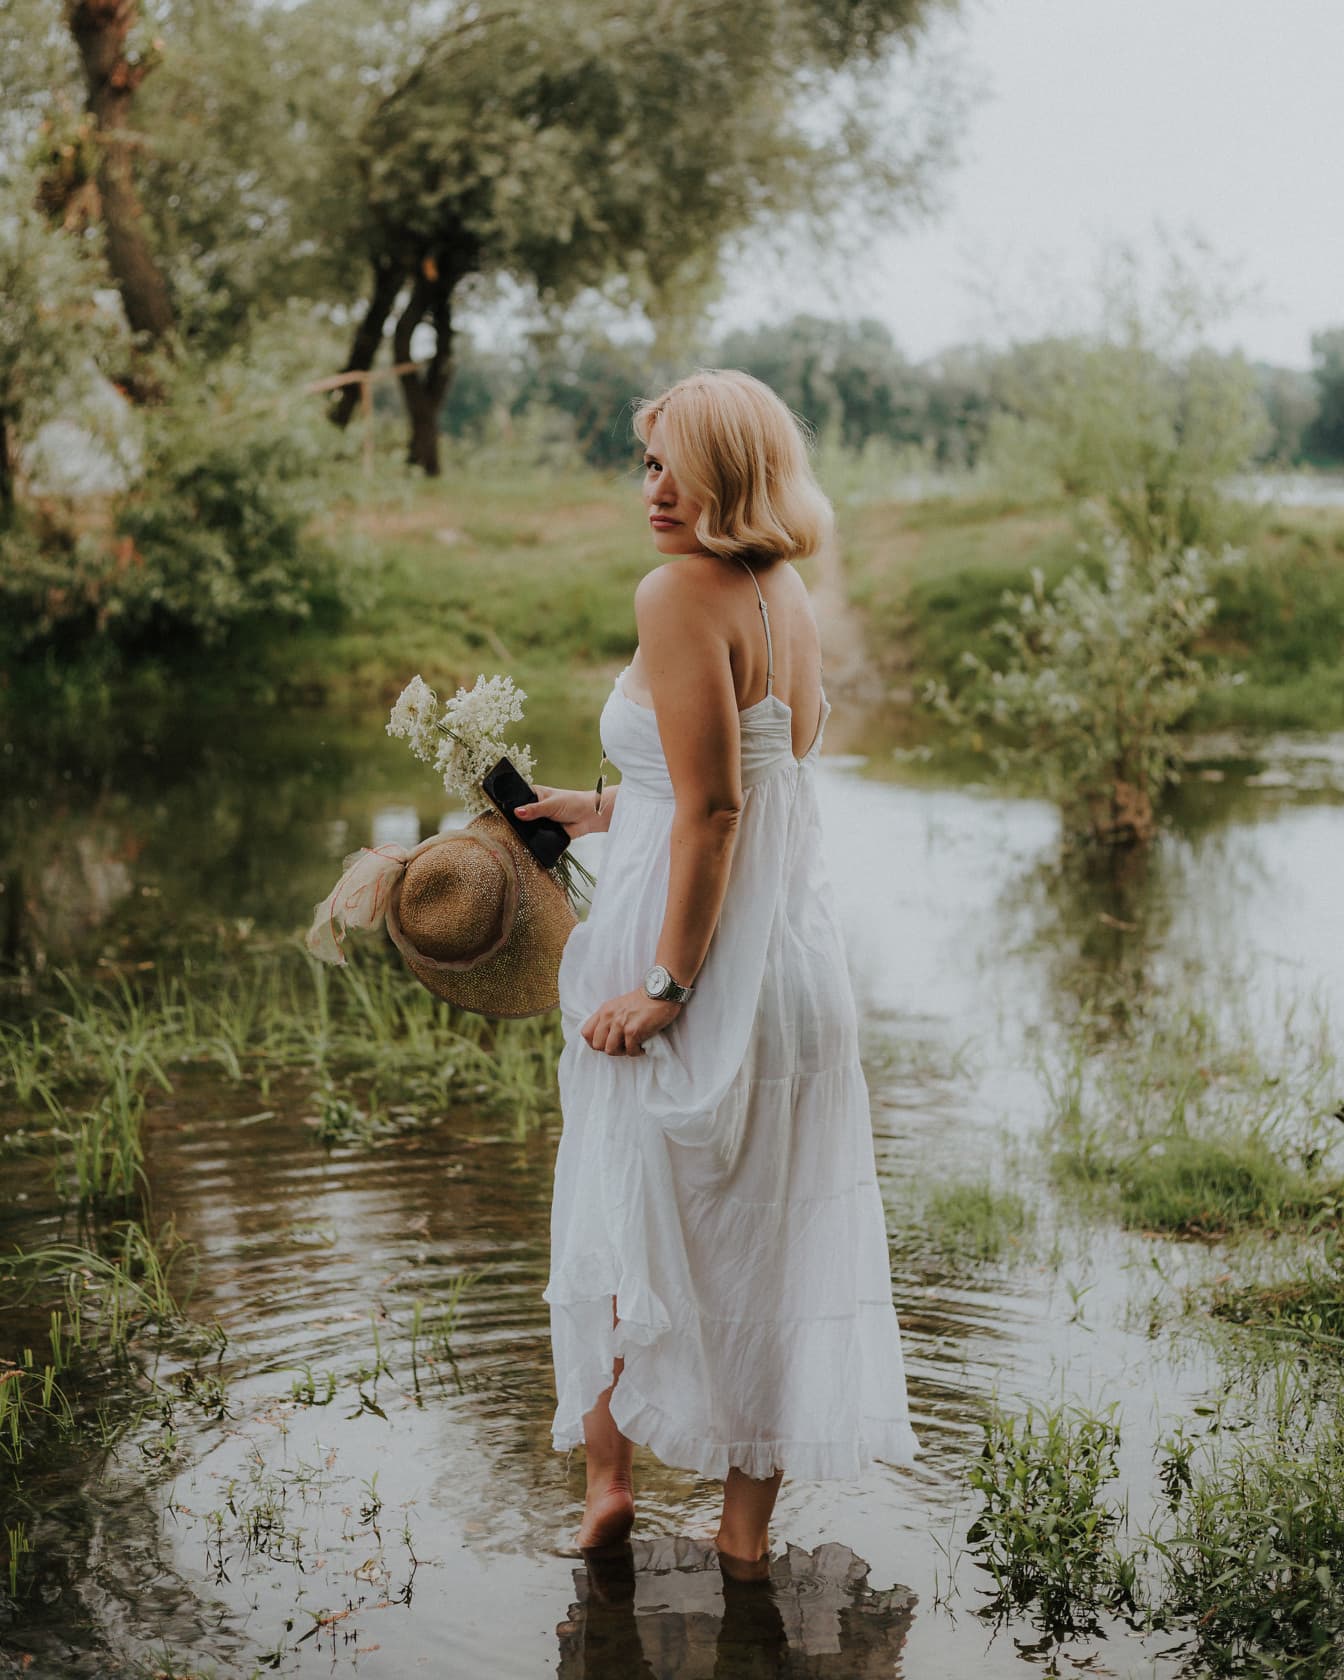 Gorgeous barefoot blonde in white dress standing in lake